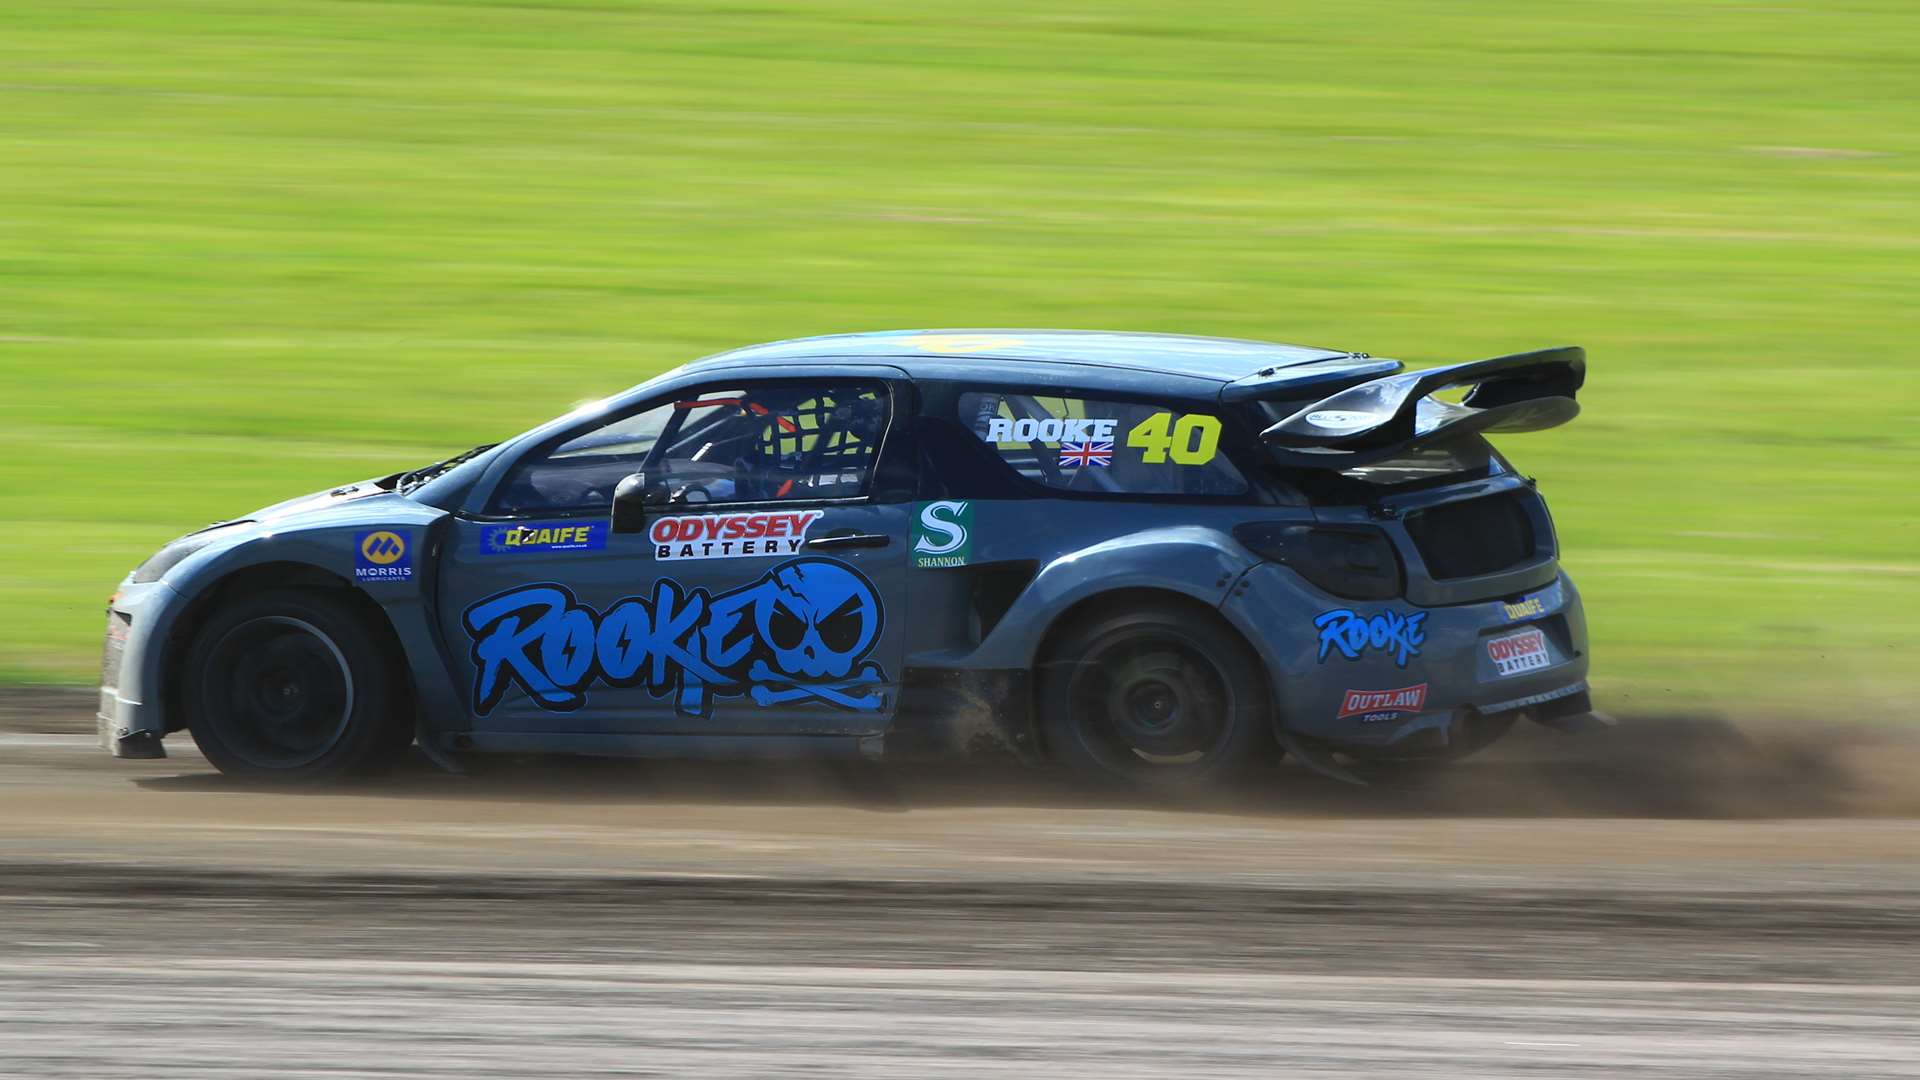 Ovenden tested the Citroen DS3 raced by Dan Rooke. Picture: Joe Wright